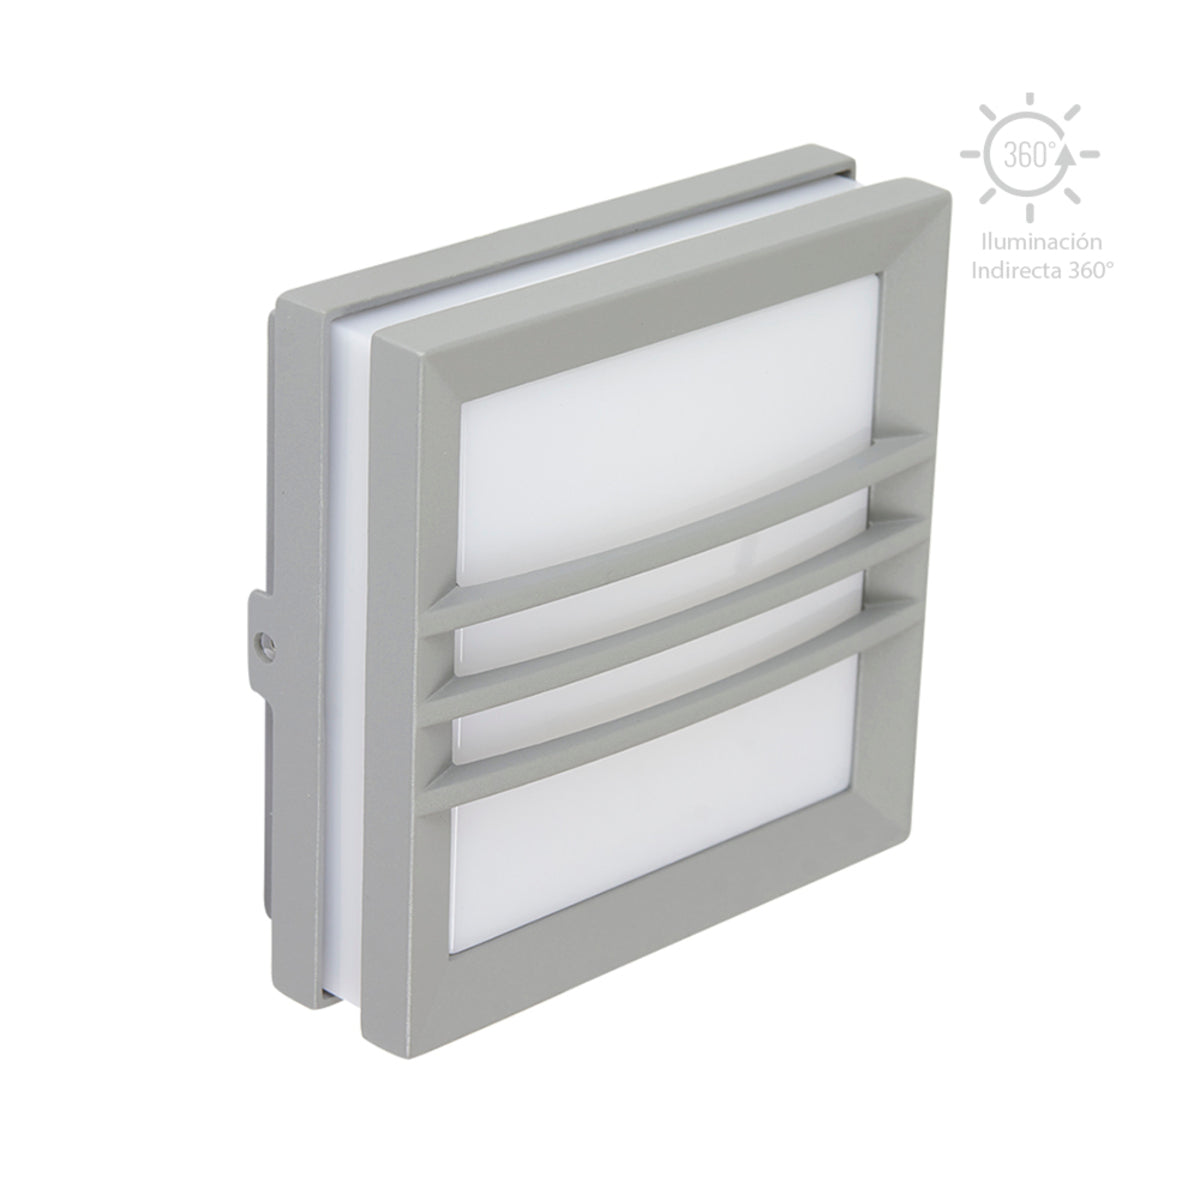 LAMPARA DE MURO PARA EXTERIOR LED 3W 4000KG X53 HLED-1172/S HLED-1172/S